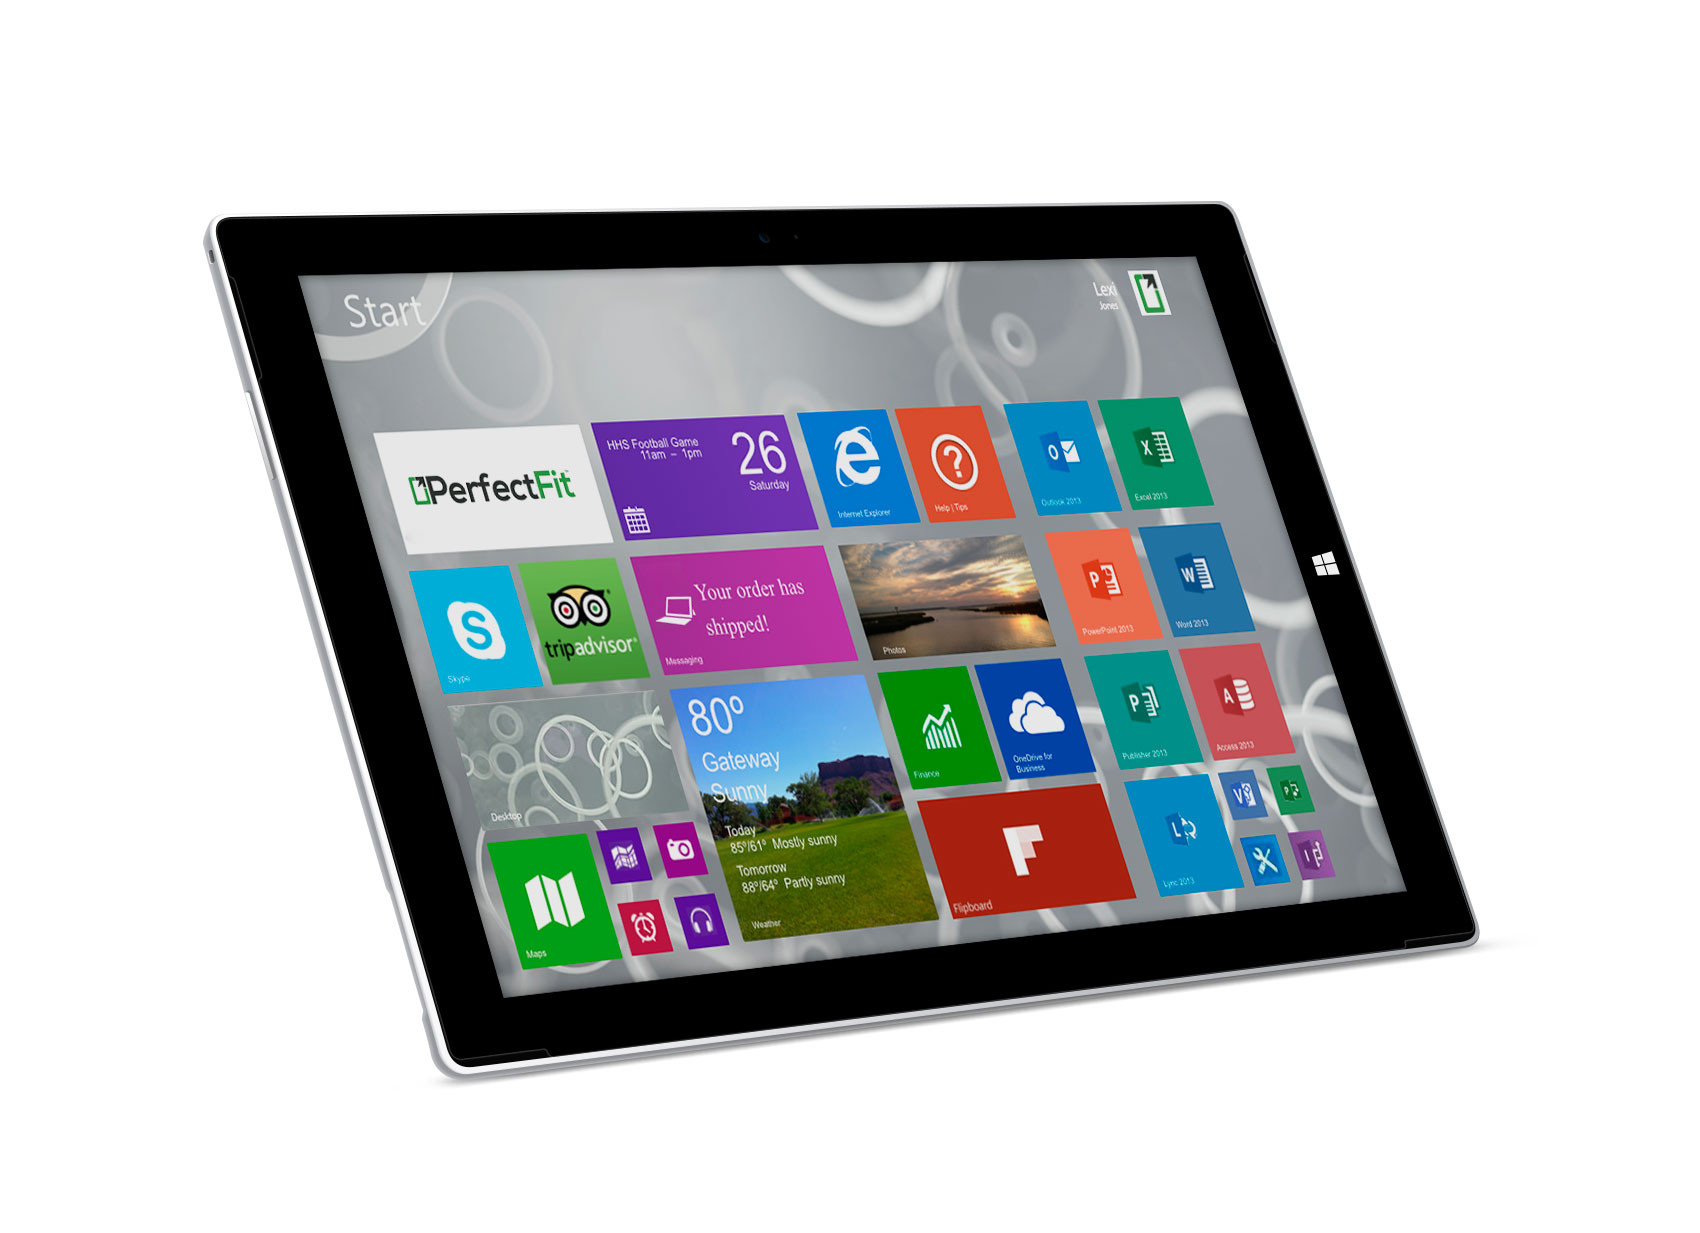 Microsoft’s Surface Tablets And Laptops Sales Drop; Shares Fall